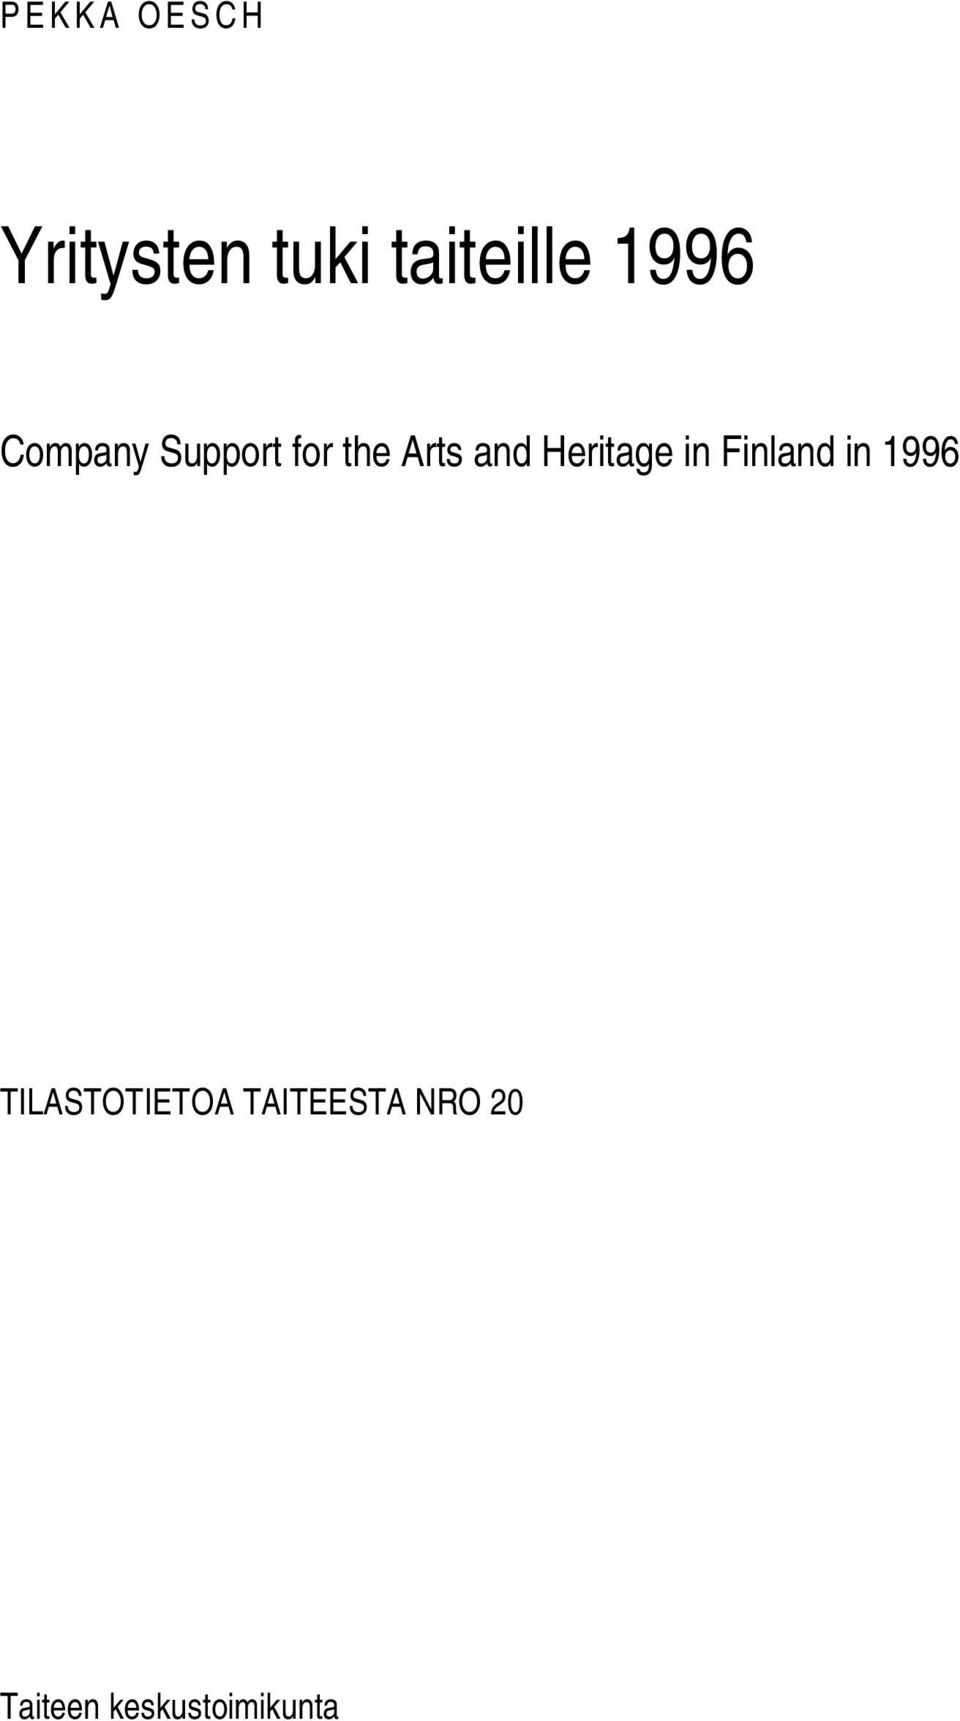 Heritage in Finland in 1996